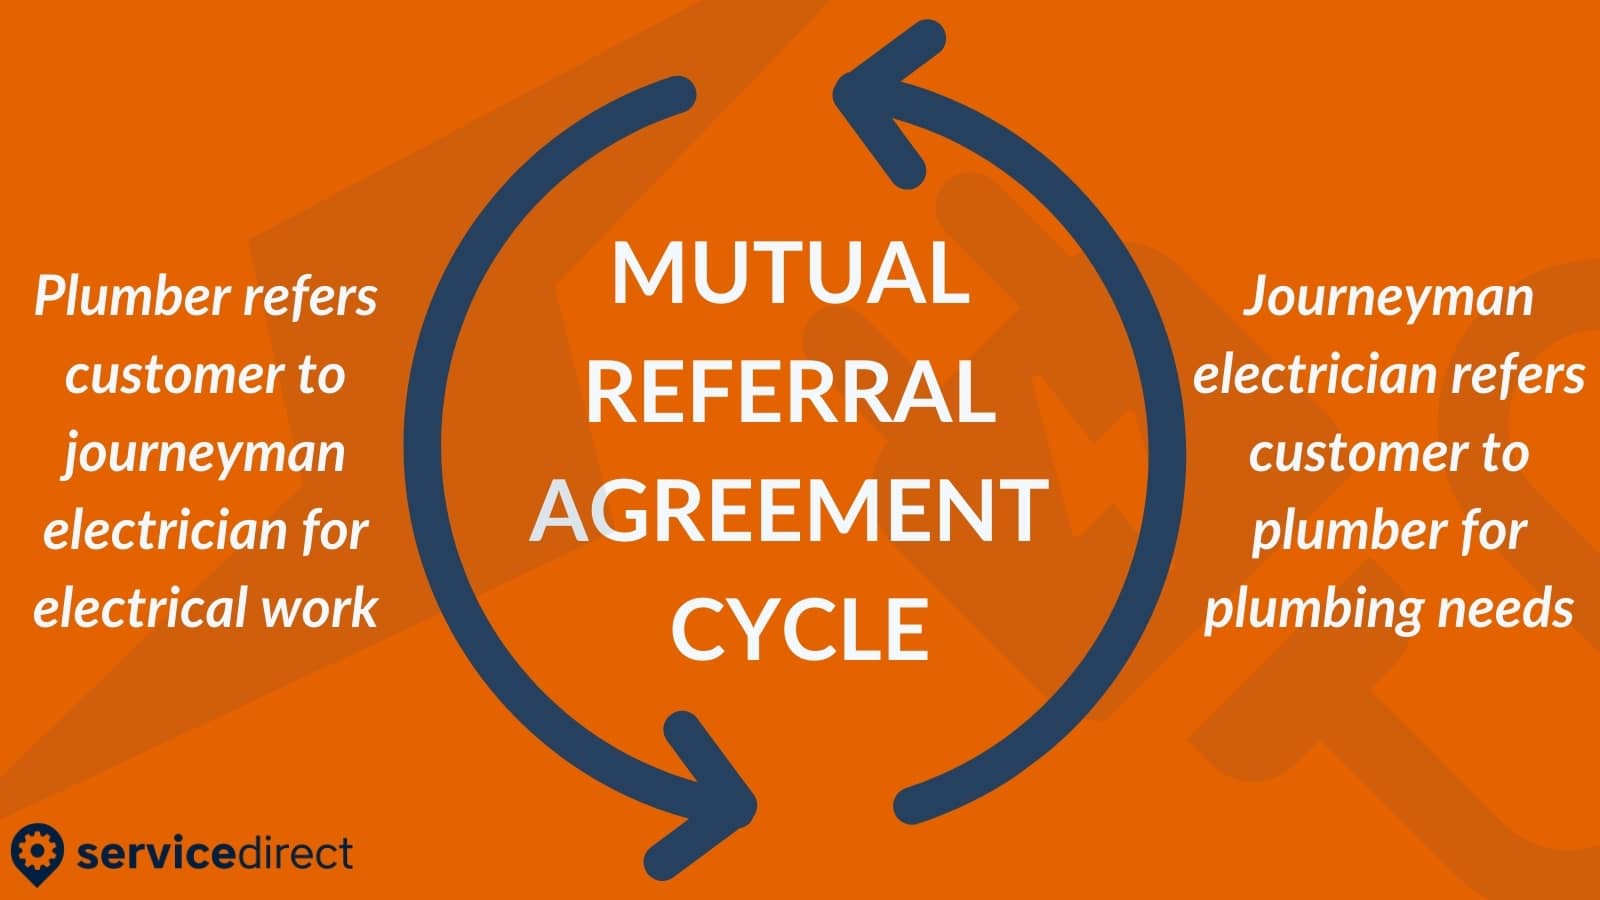 The mutual referral agreement cycle for electricians. 